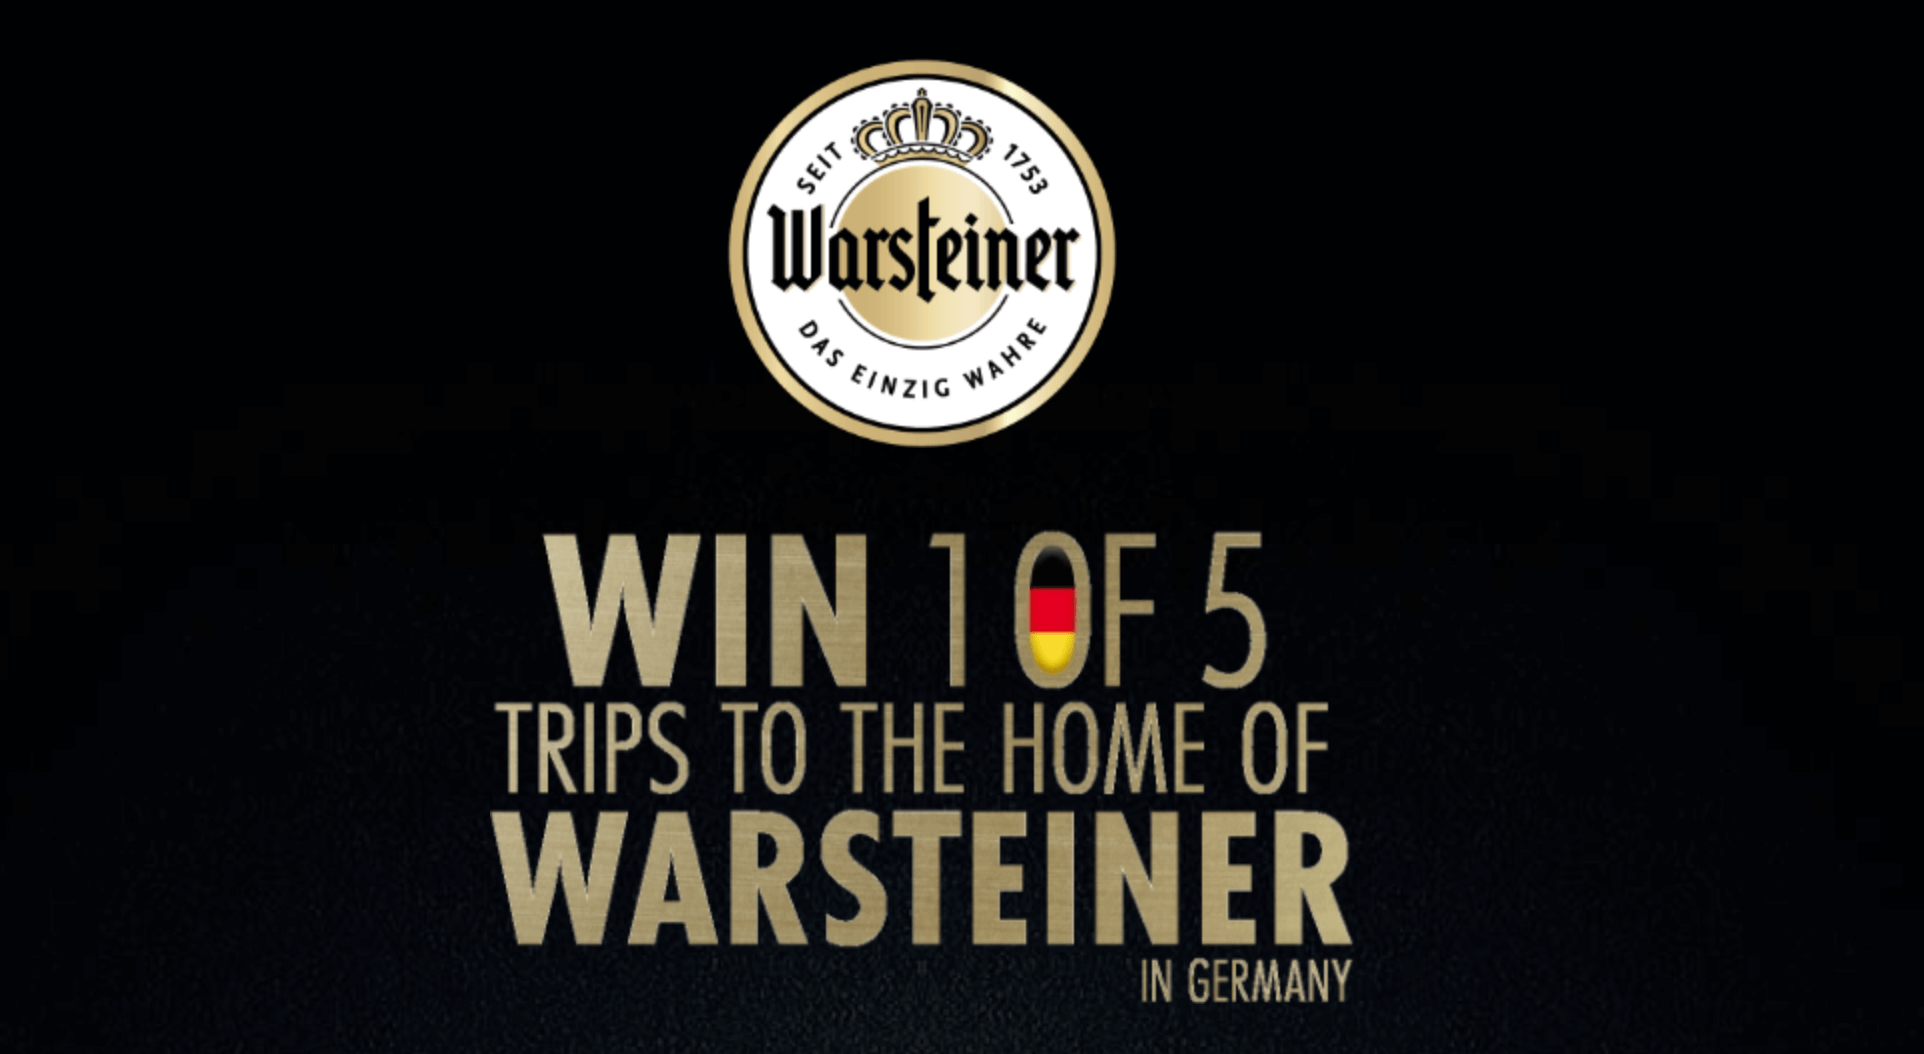 Win a trip to Germany with Warsteiner